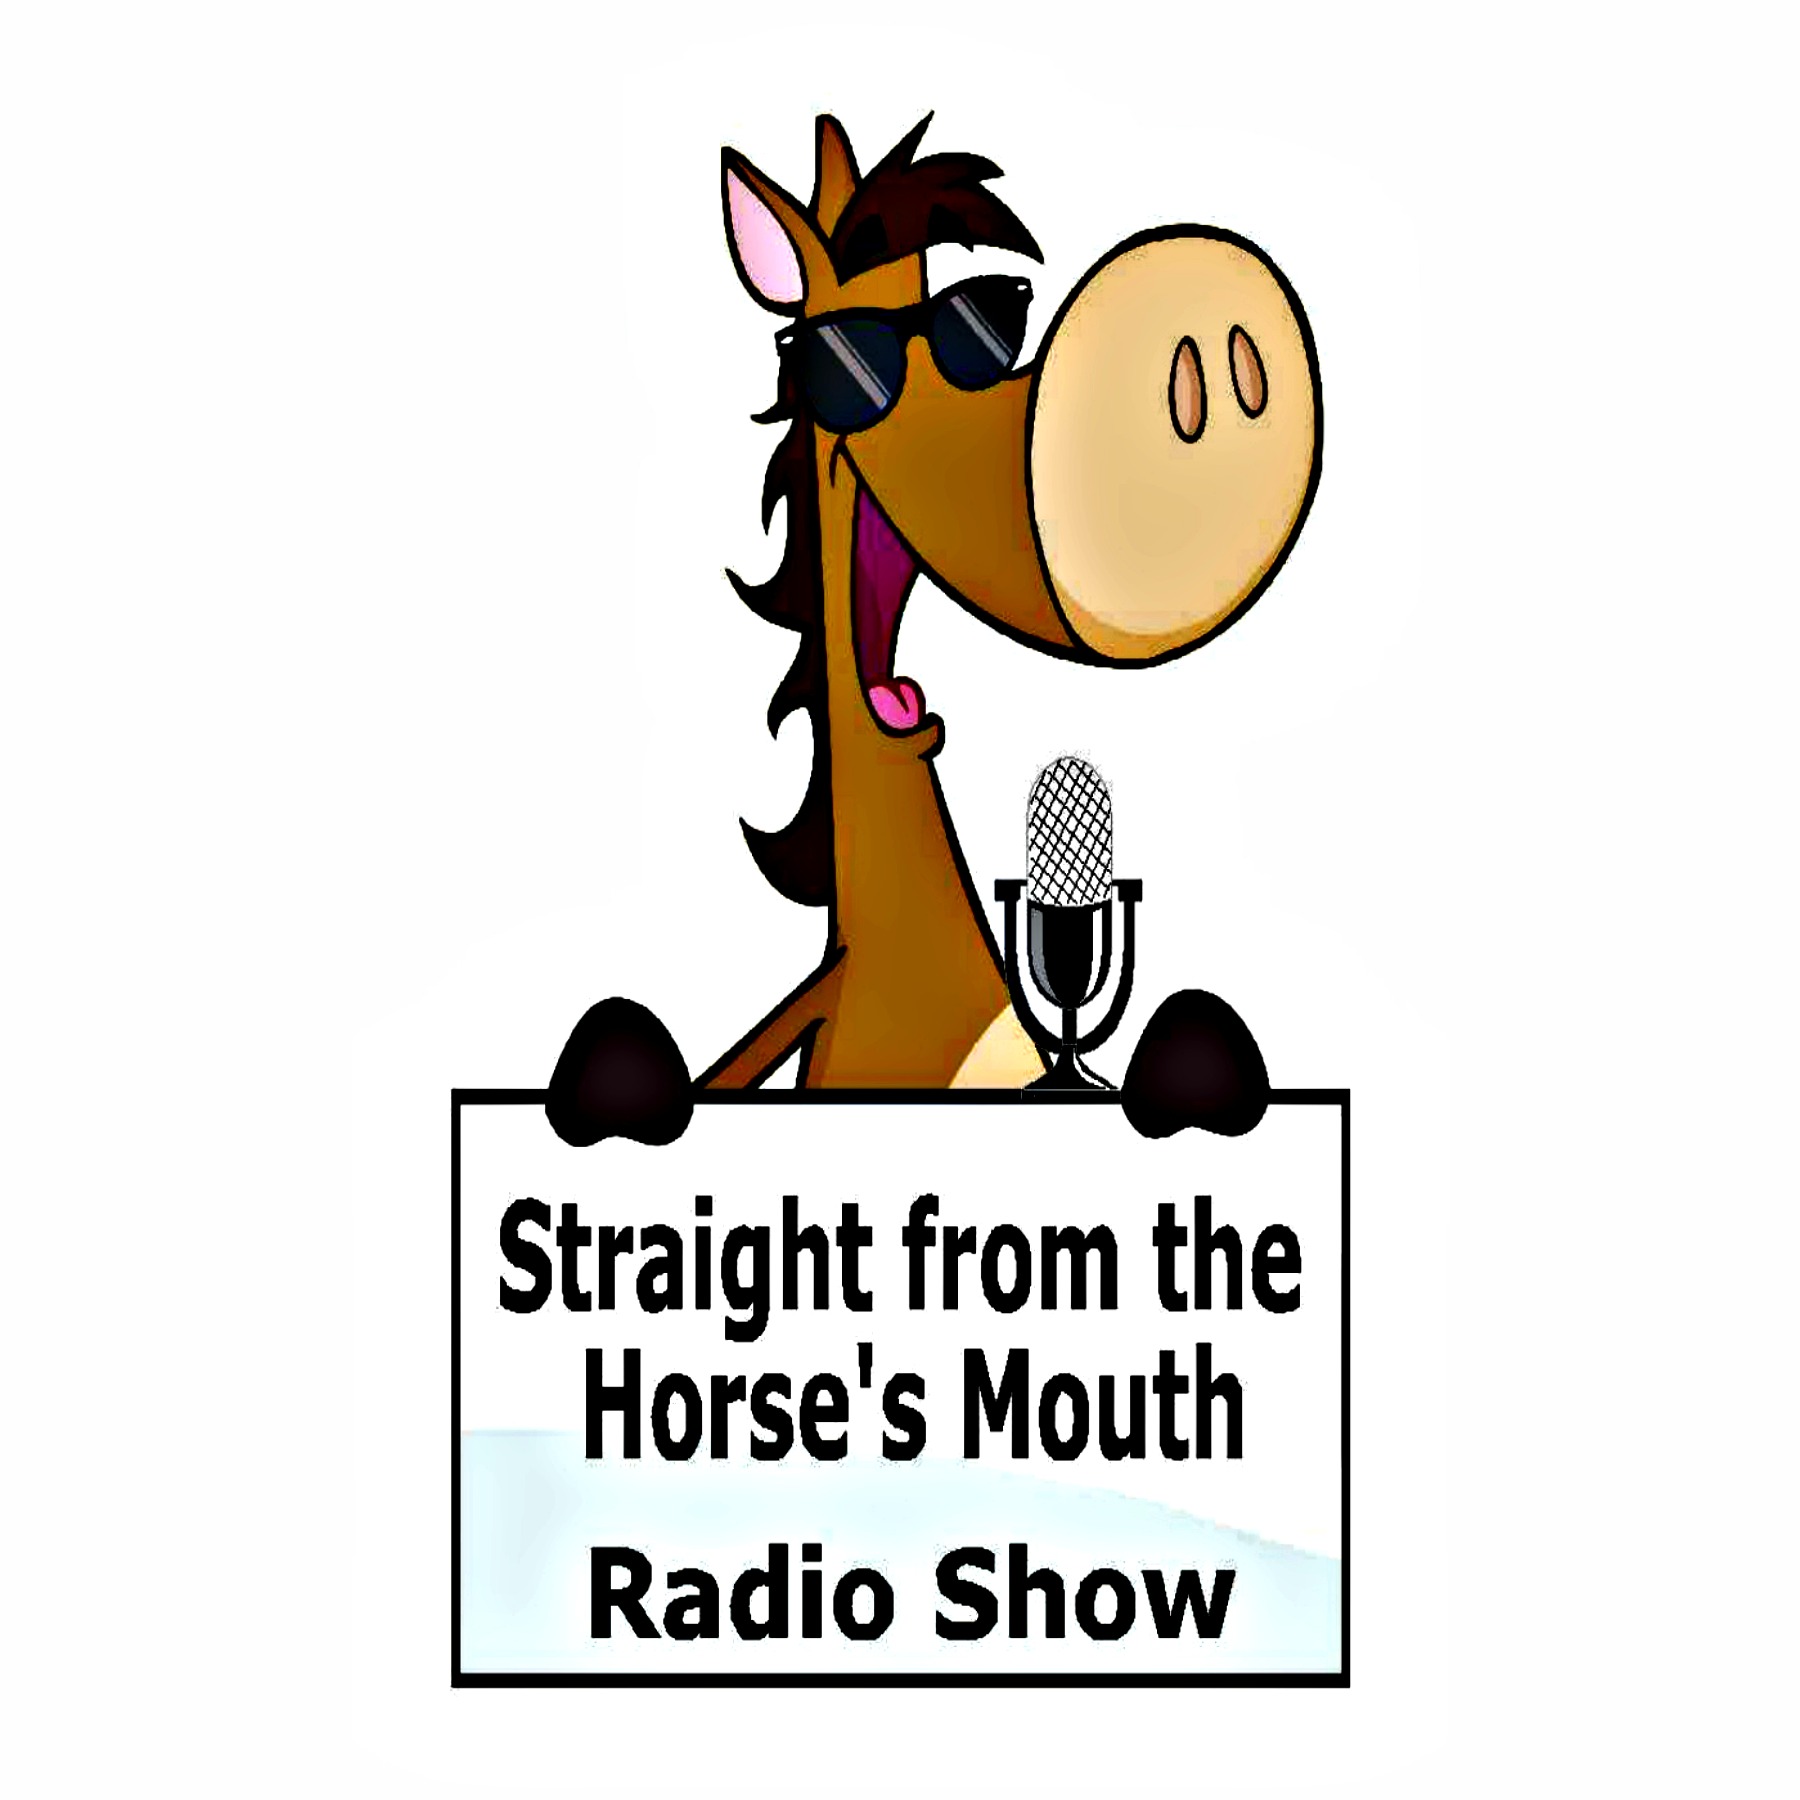 STRAIGHT FROM THE HORSE'S MOUTH RADIO SHOW LOGO